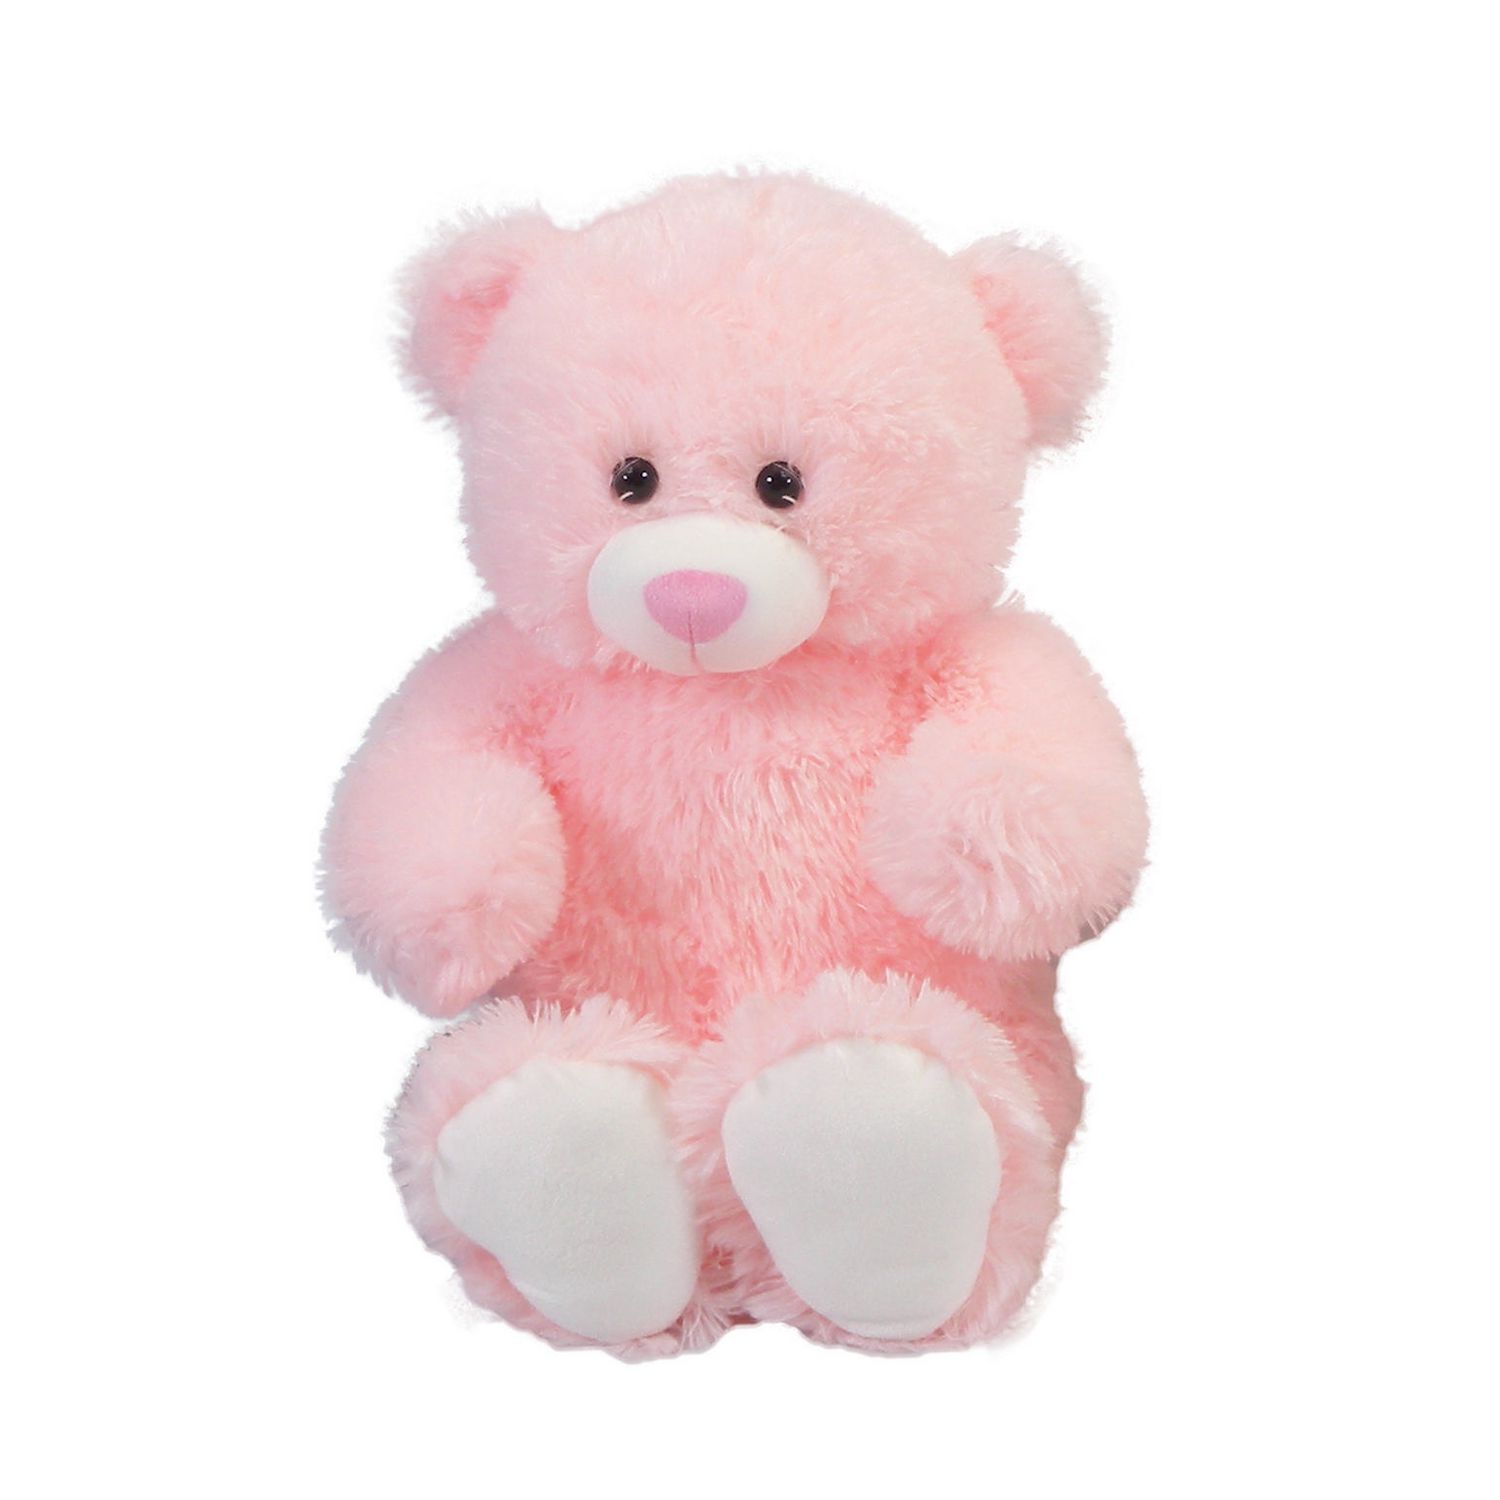 teddy bear pink and white